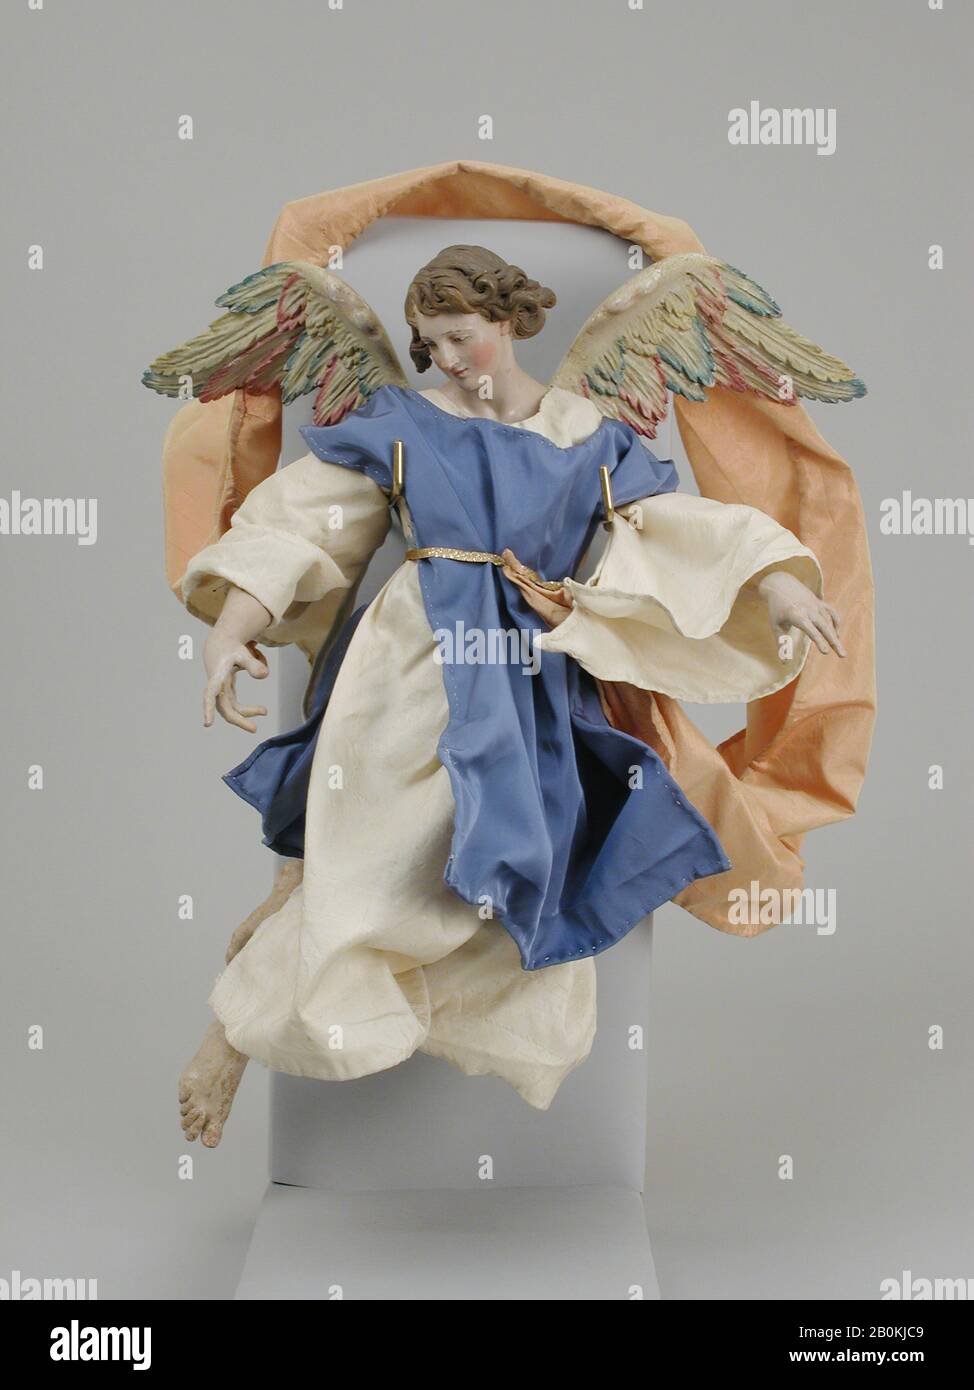 Angel, Italian, Naples, late 18th–early 19th century, Italian, Naples, Polychromed terracotta head; wooden limbs and wings; body of wire wrapped in tow; silk garments, H. 14 1/2 in. (36.8 cm.), Crèche Stock Photo